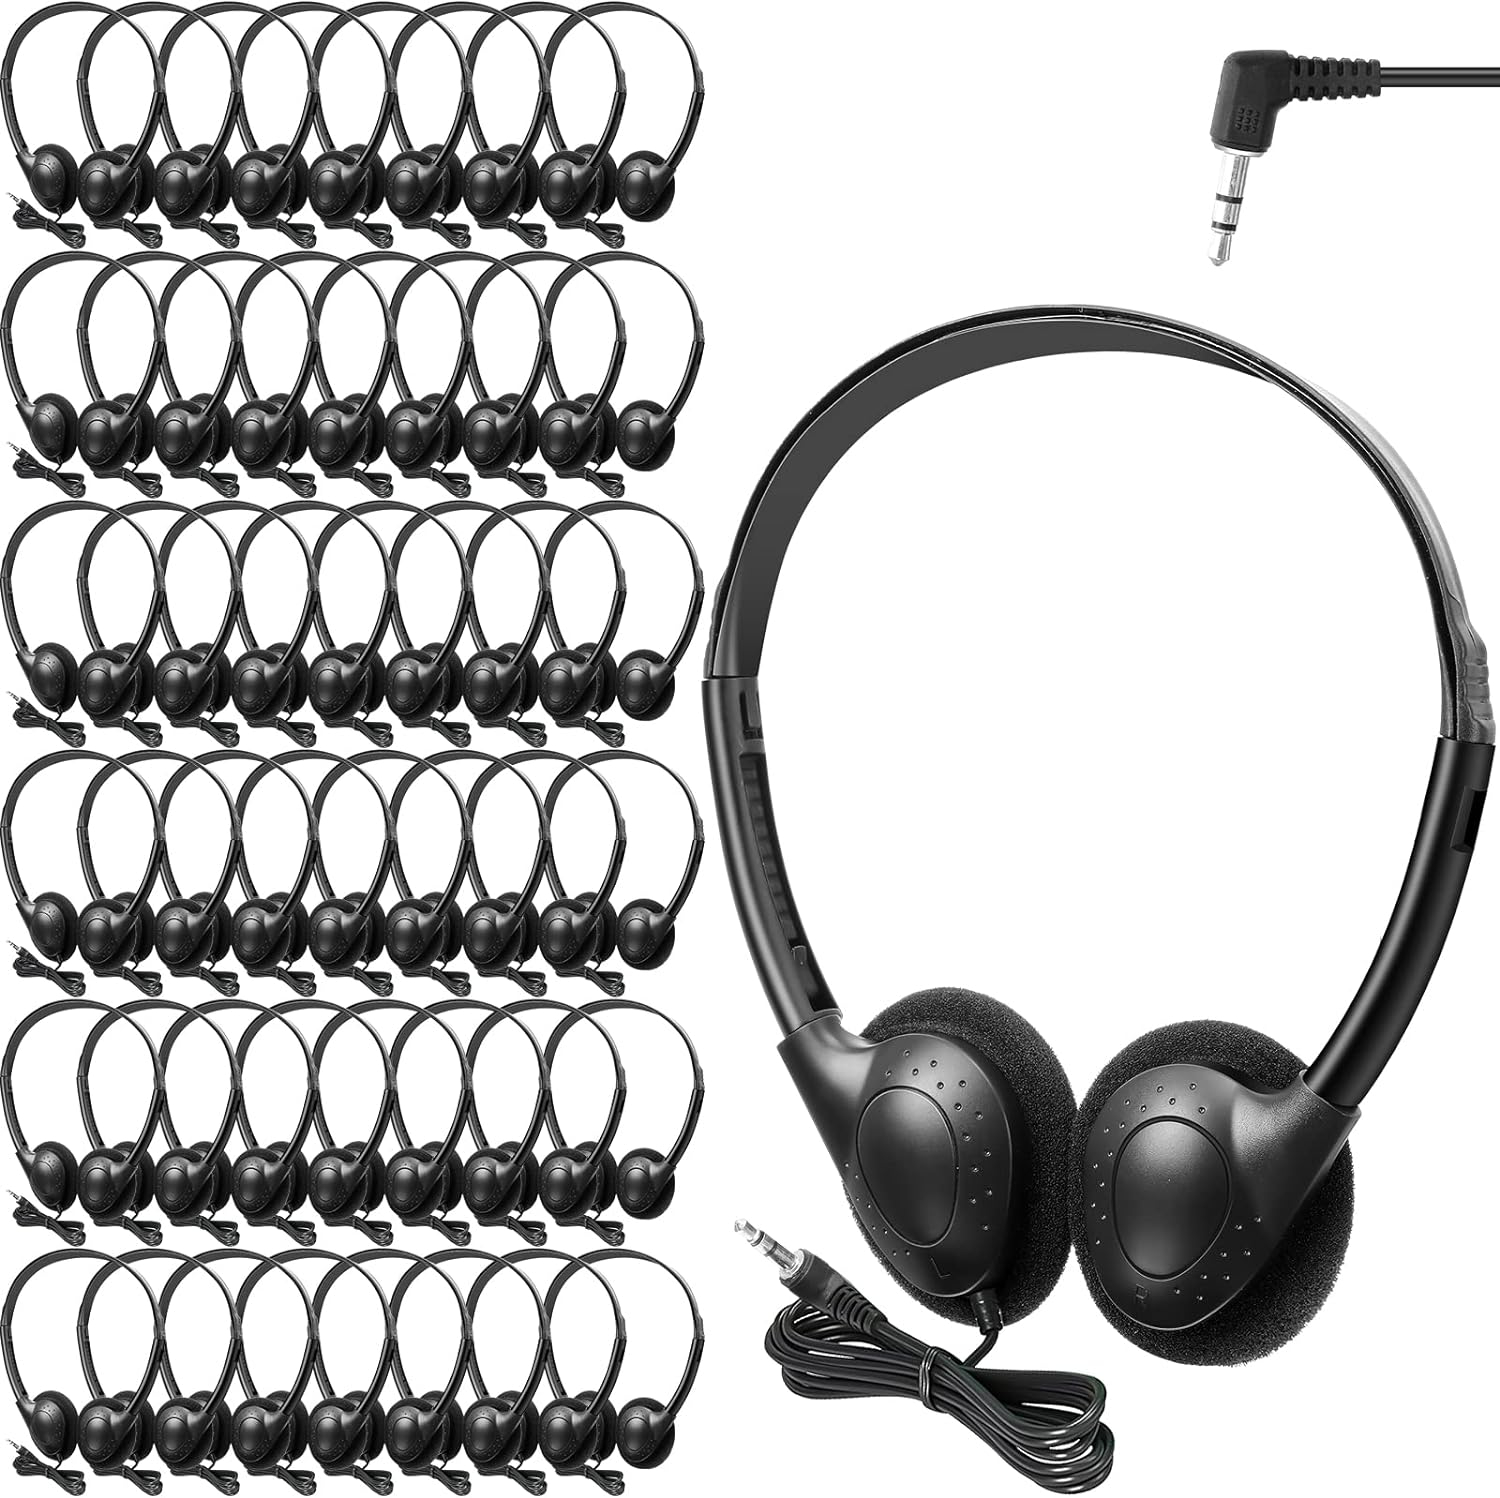 Frienda 48 Pack Classroom Headphones on Ear Wired Stereo Headset with 3.5mm Jack, Over The Head Student Earphone Set for Kids Adults School Library Airplane Computer Laptop, No Microphone (Black)